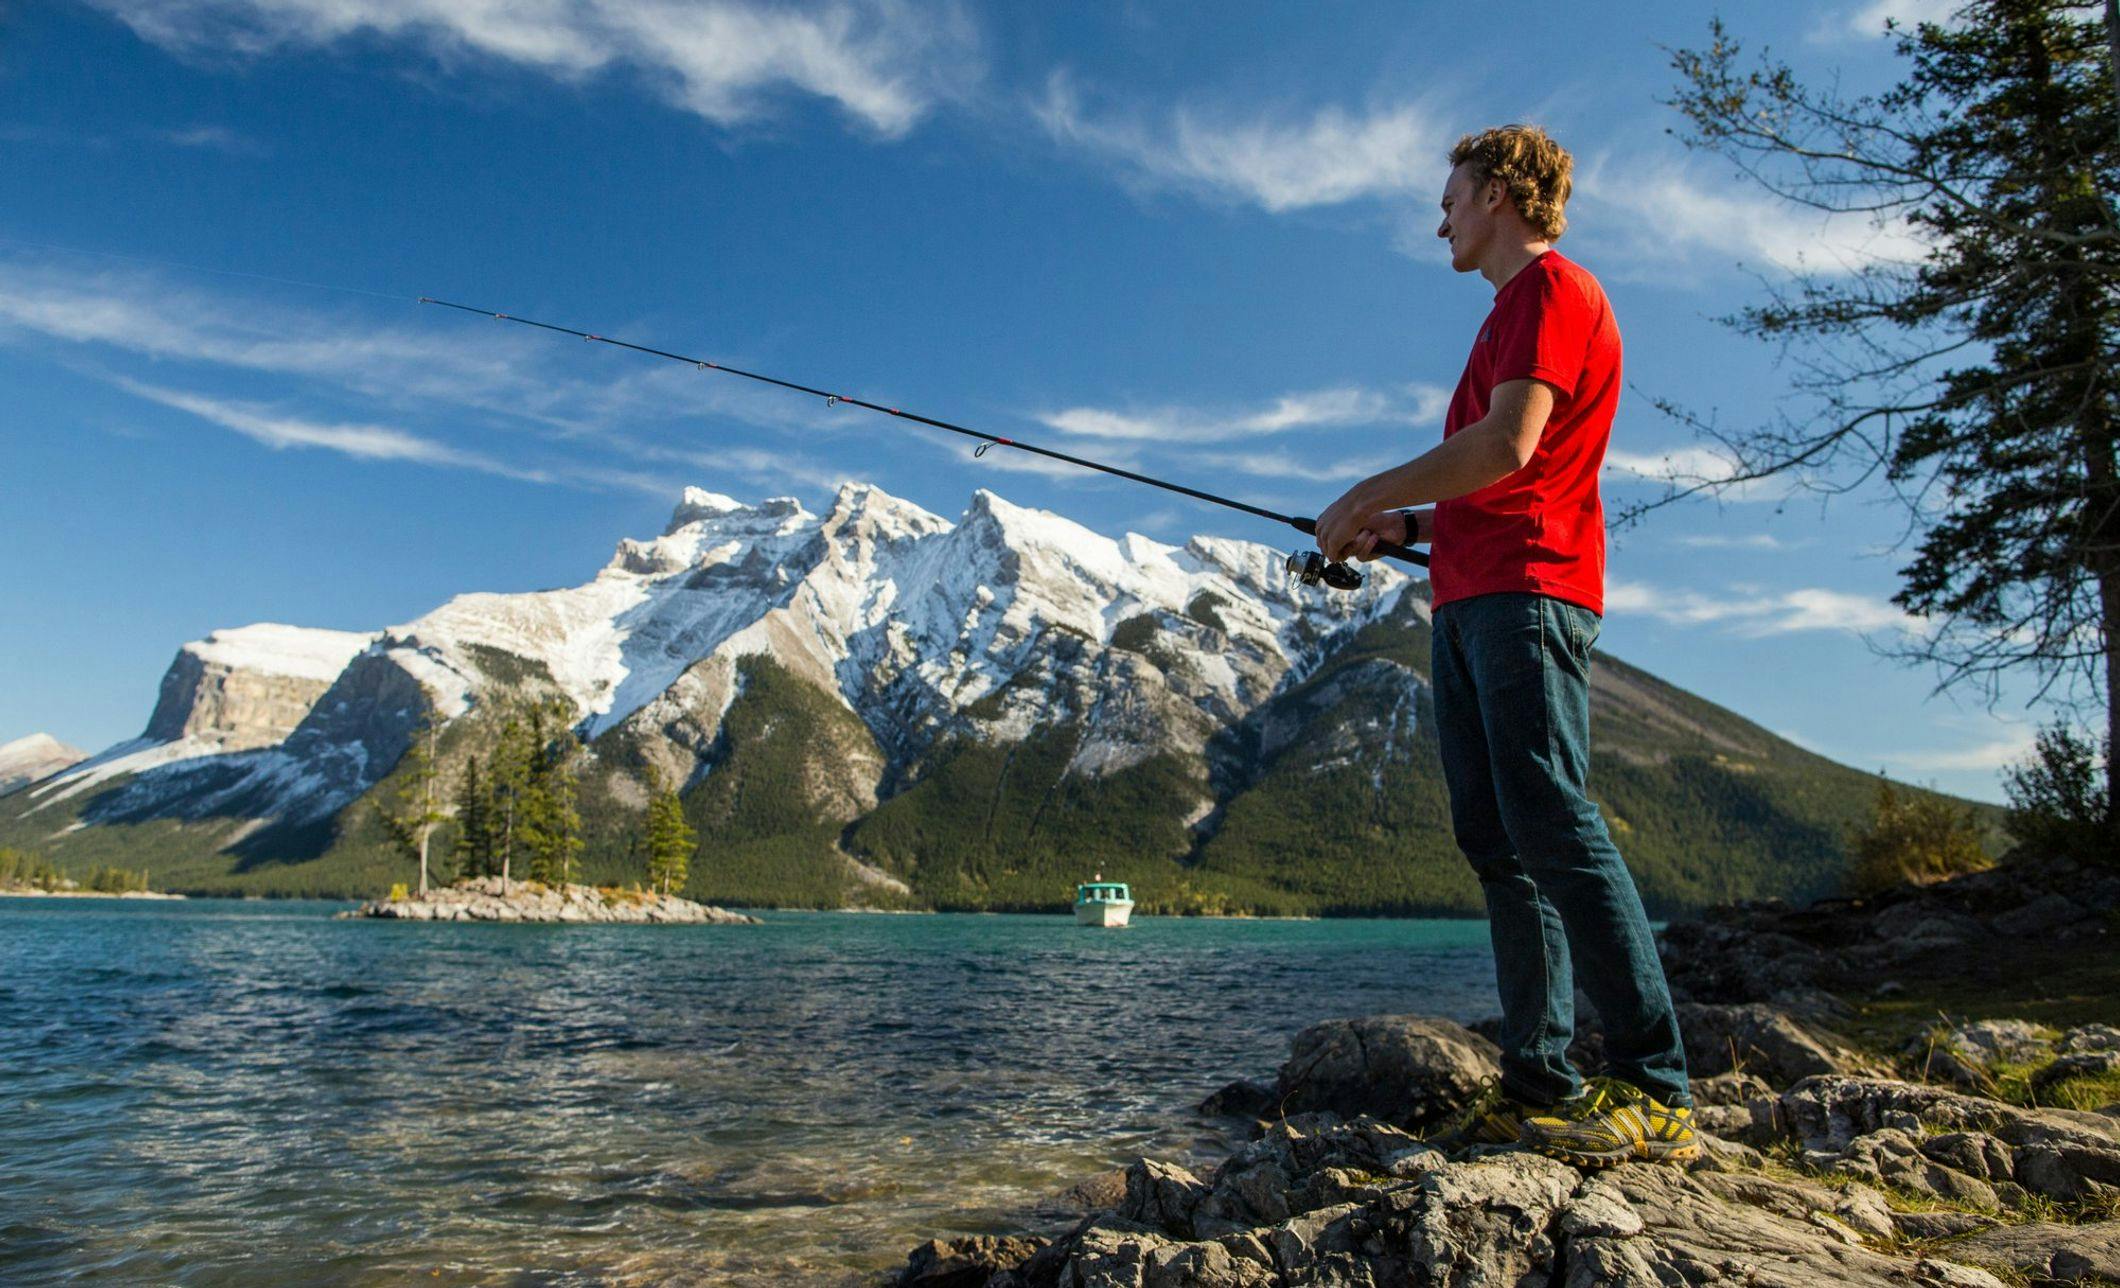 A man in tan pants and a red t-shirt fishes in a stunning blue lake framed by mountains behind him